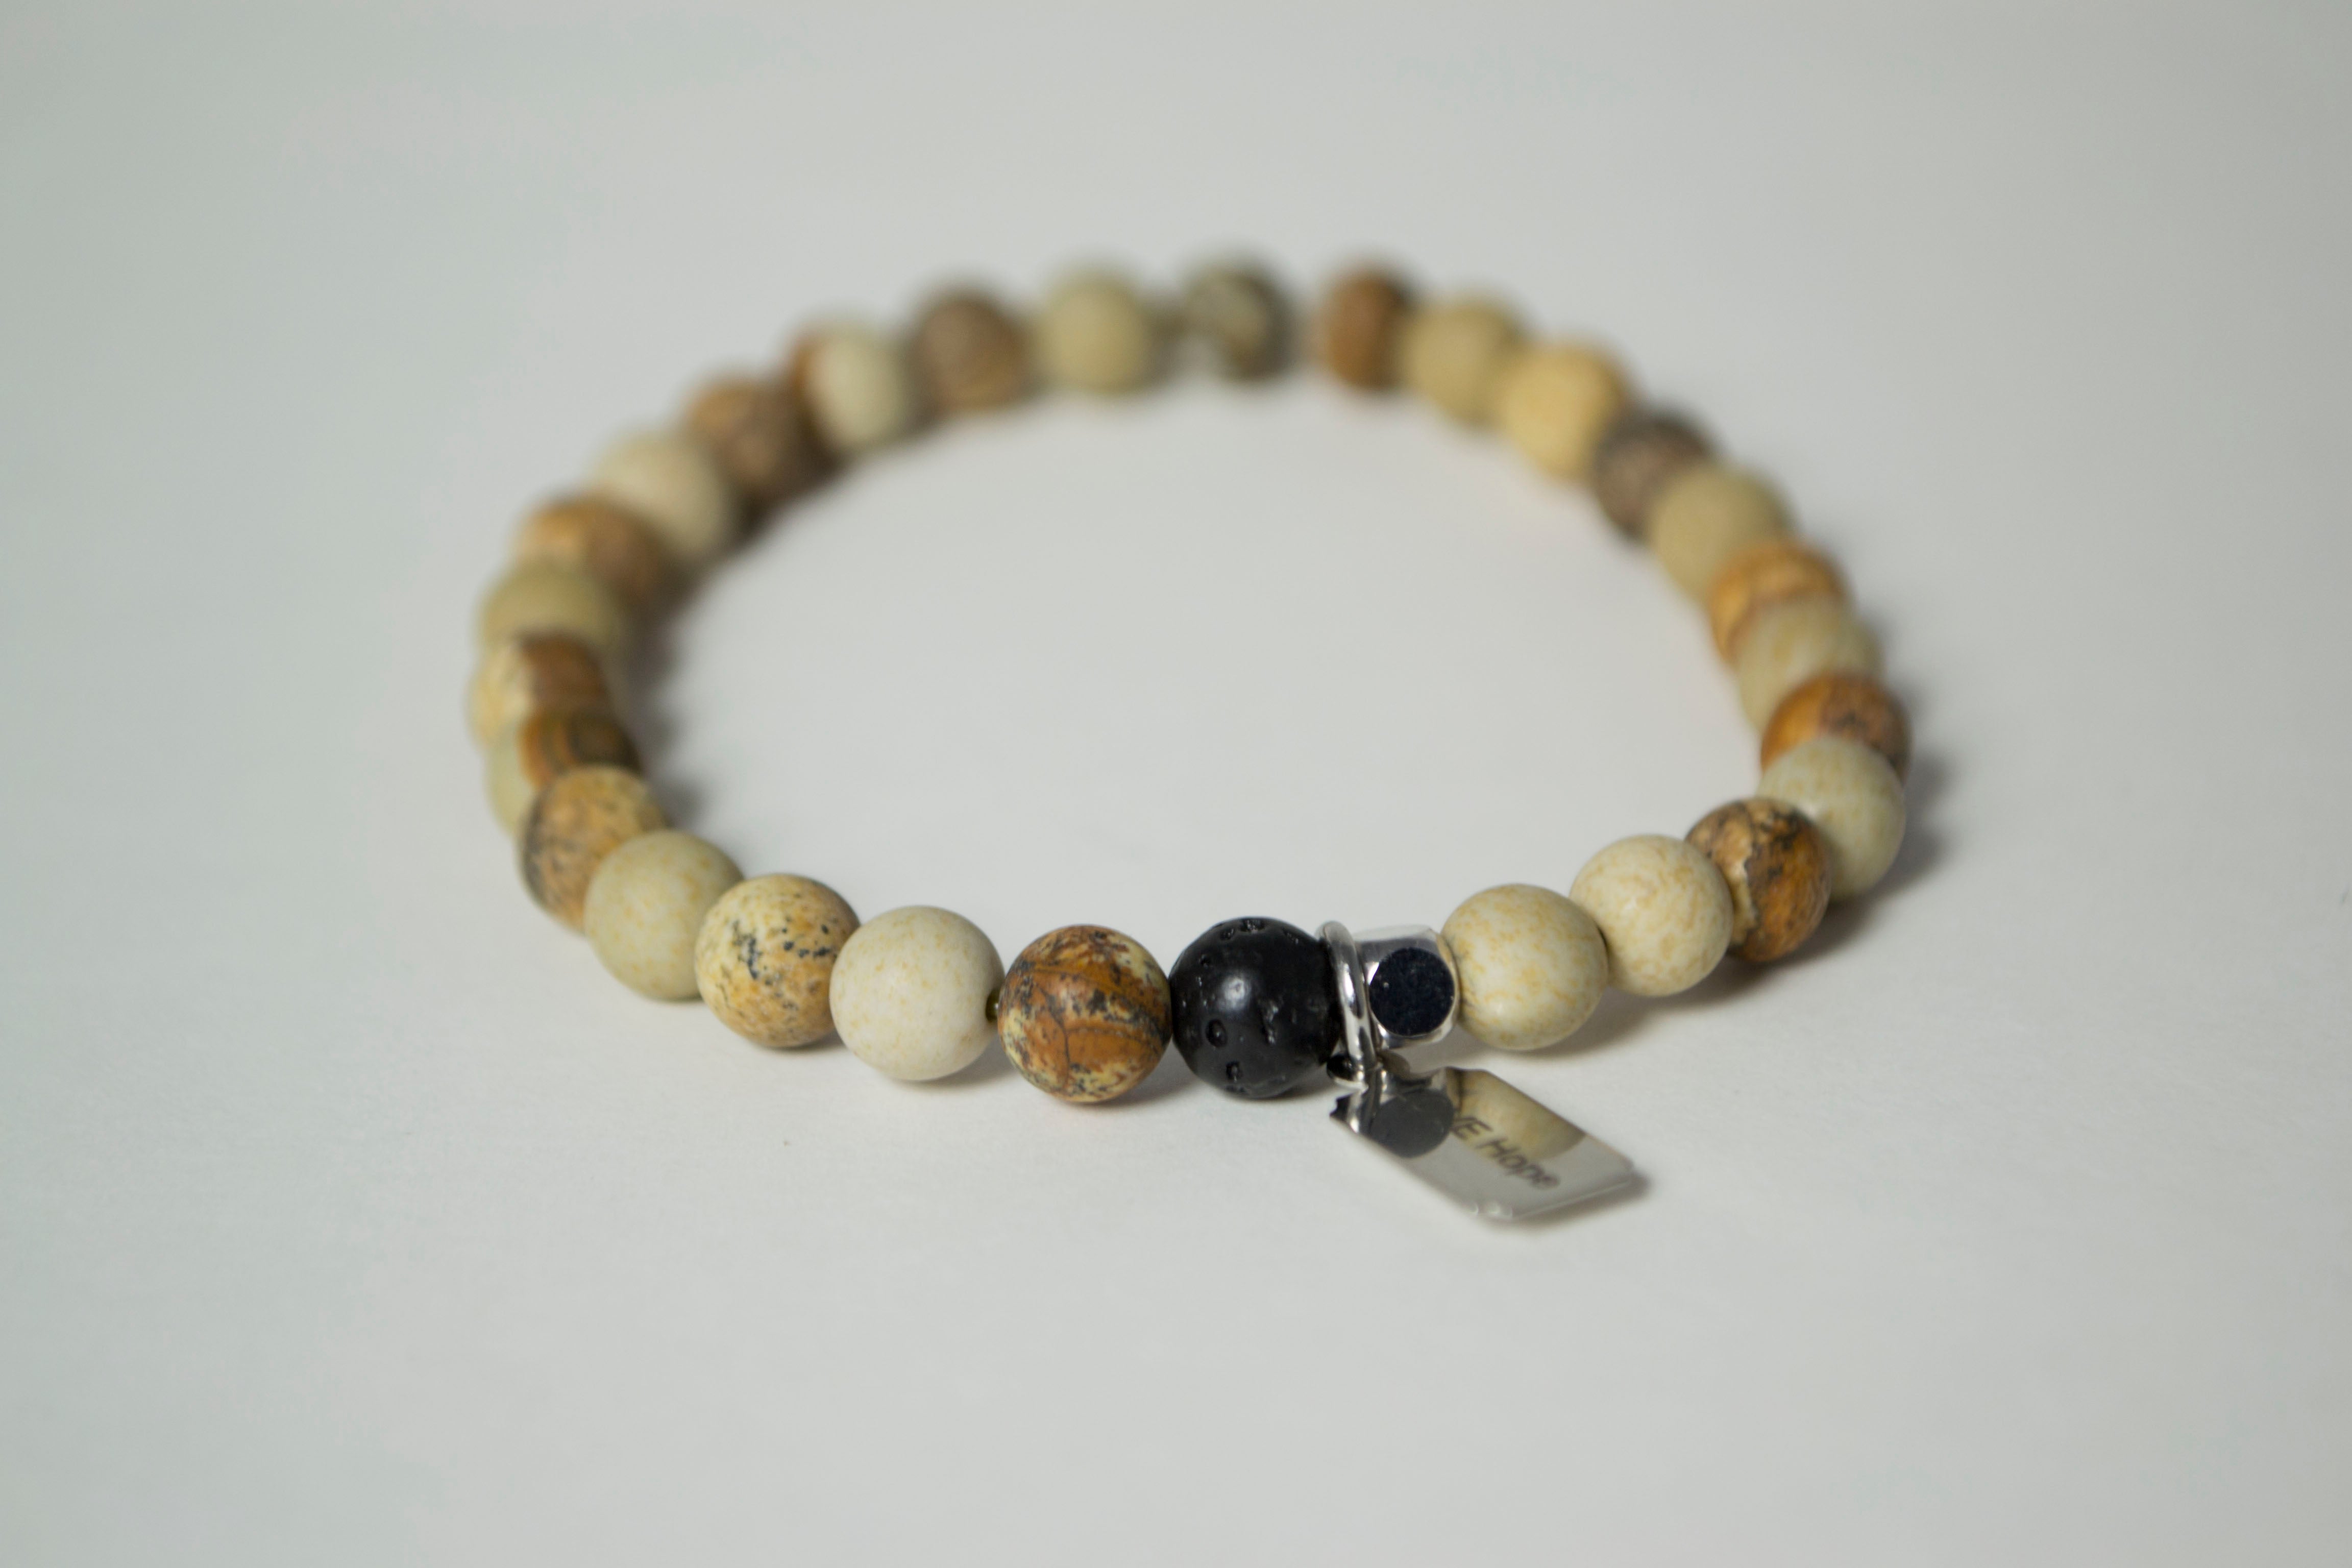 Rear view of the natural stones in the Infused Picture Jasper bracelet with details of the color and texture, including detail of the infusible Lava Stone bead. In the background is a blurred view of the front of the bracelet.